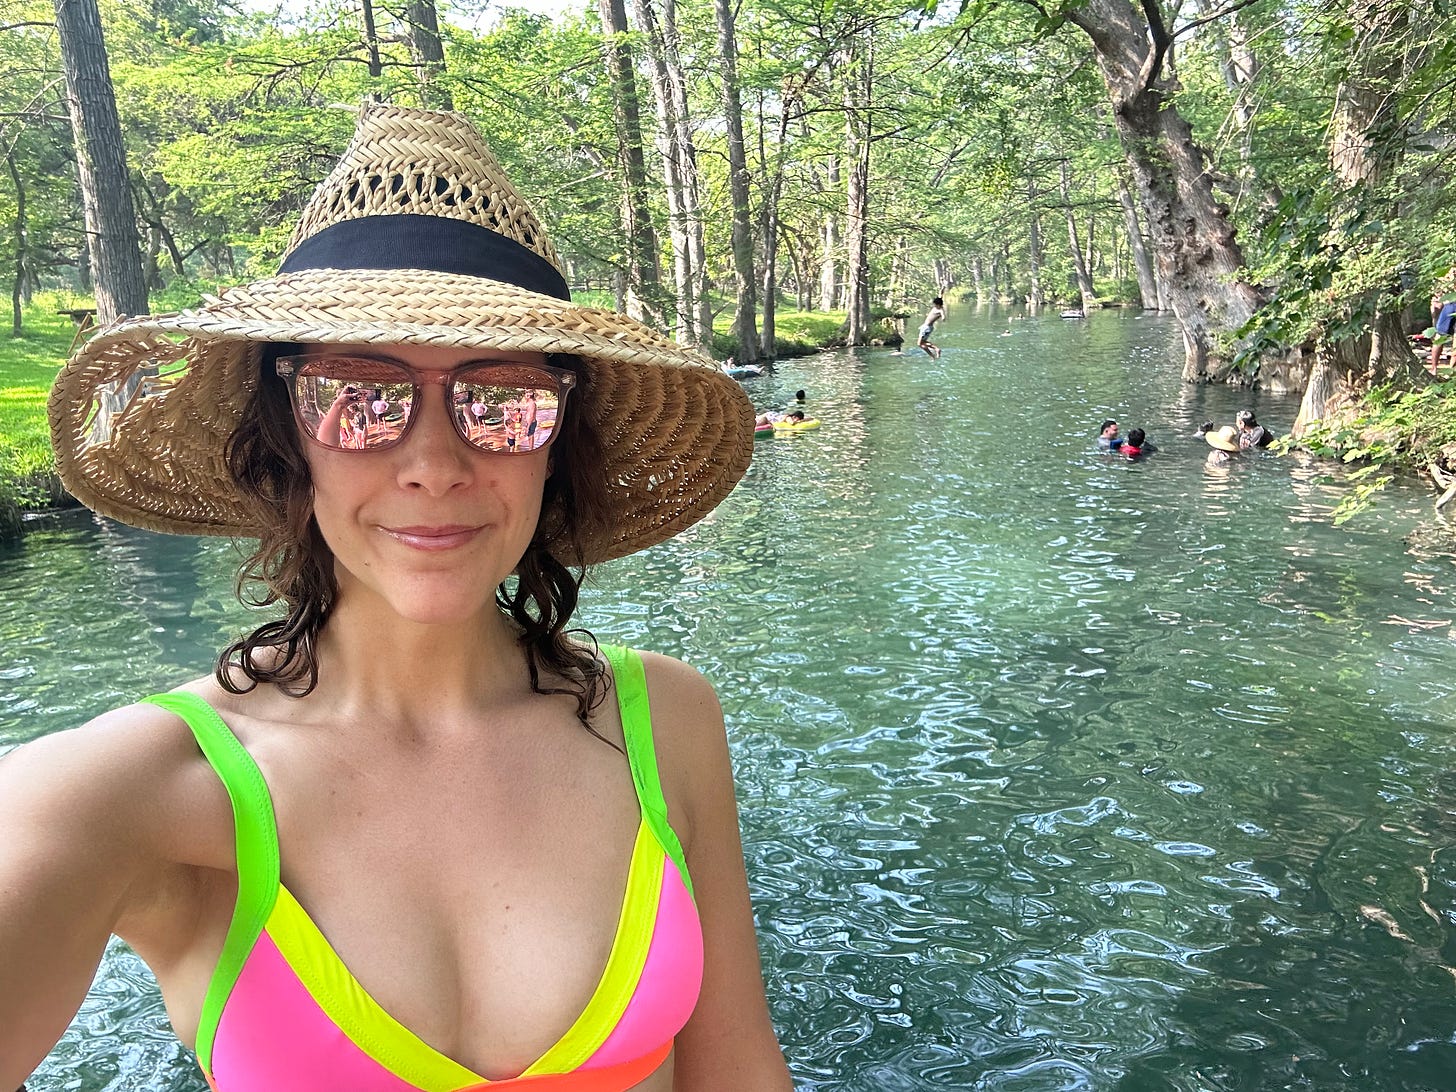 A women wearing a pink bikini top, reflective sunglasses, and a straw hat takes a selfie with a swimming hole behind her.